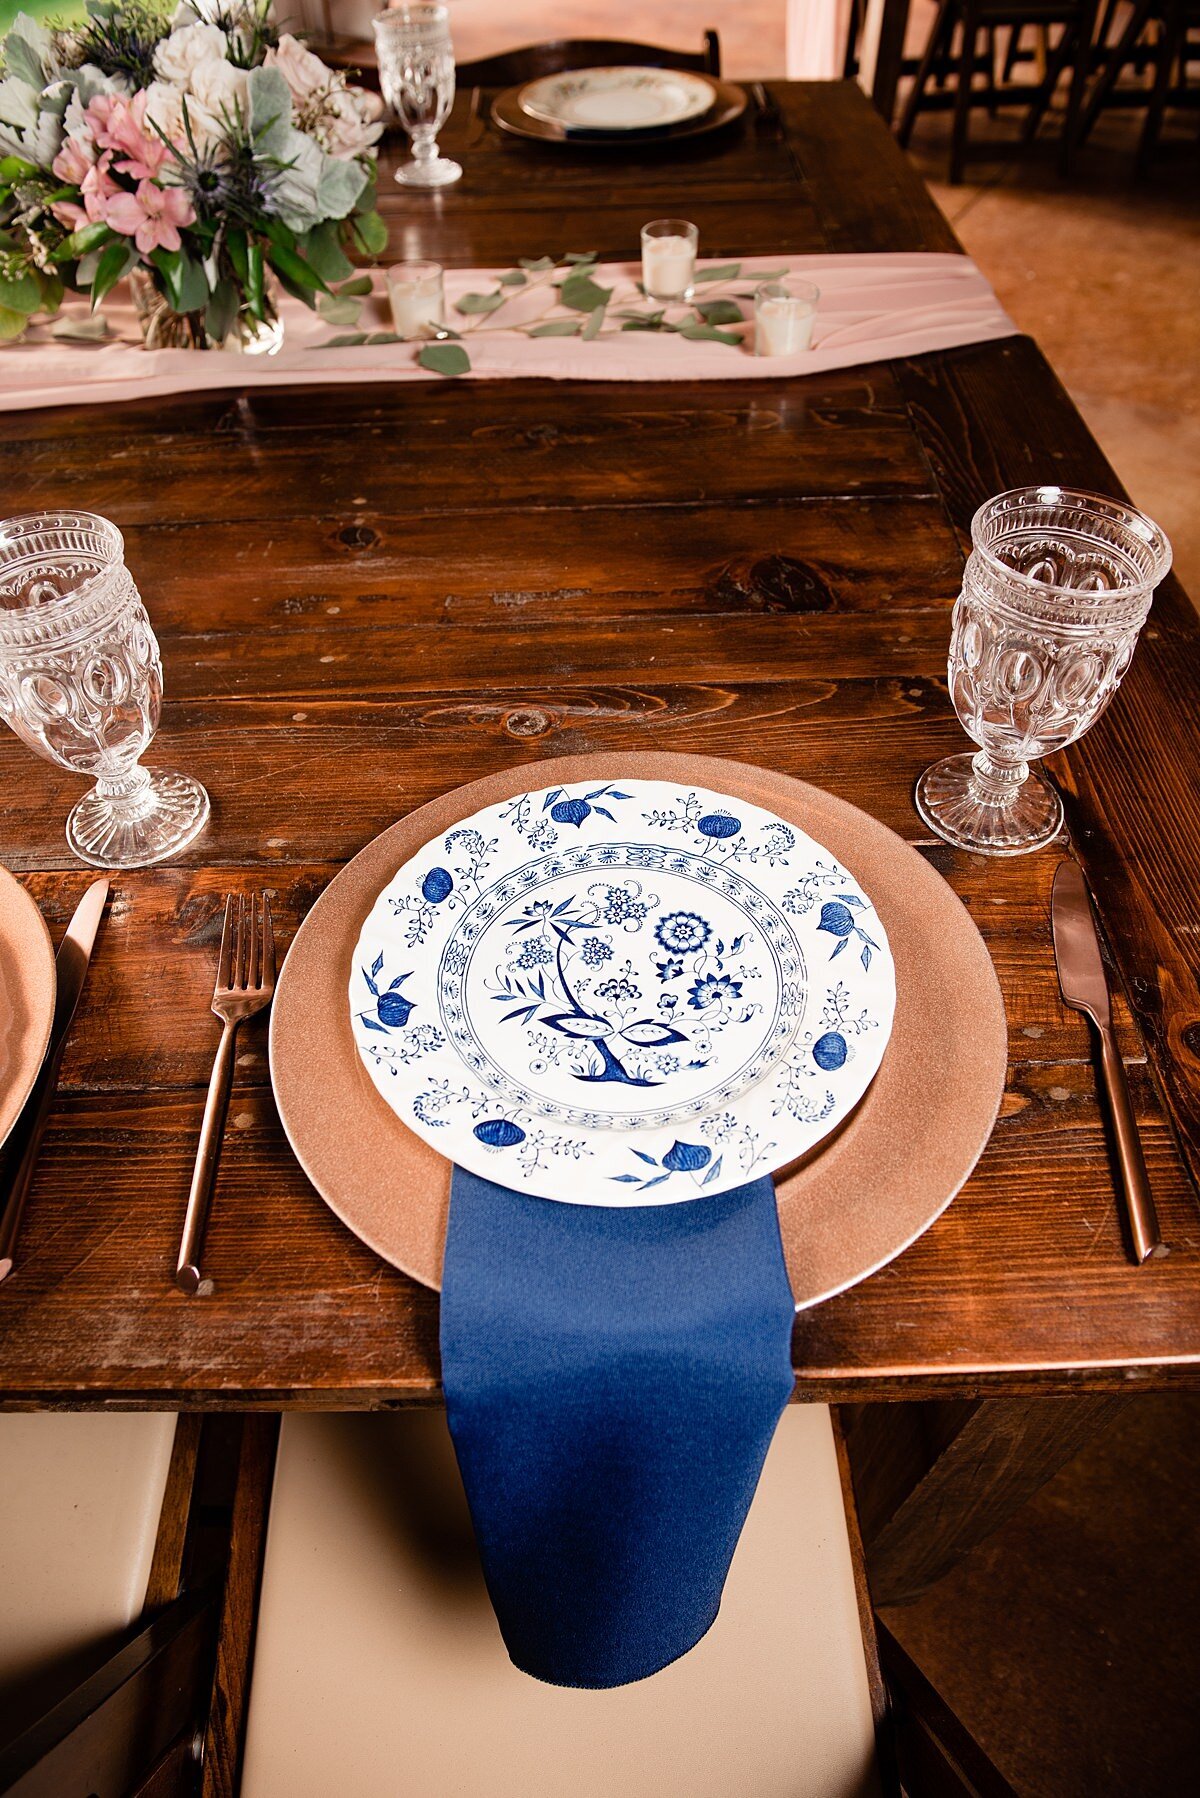 Dark wood farm table set with a gold charger, clear crystal goblet, a blue linen napkin and a blue vintage china plate. Gold flatware is set on either side of the vintage plate. The center of the table has a blush sheer table runner and a low floral centerpiece with blush and white flowers with eucalyptus.